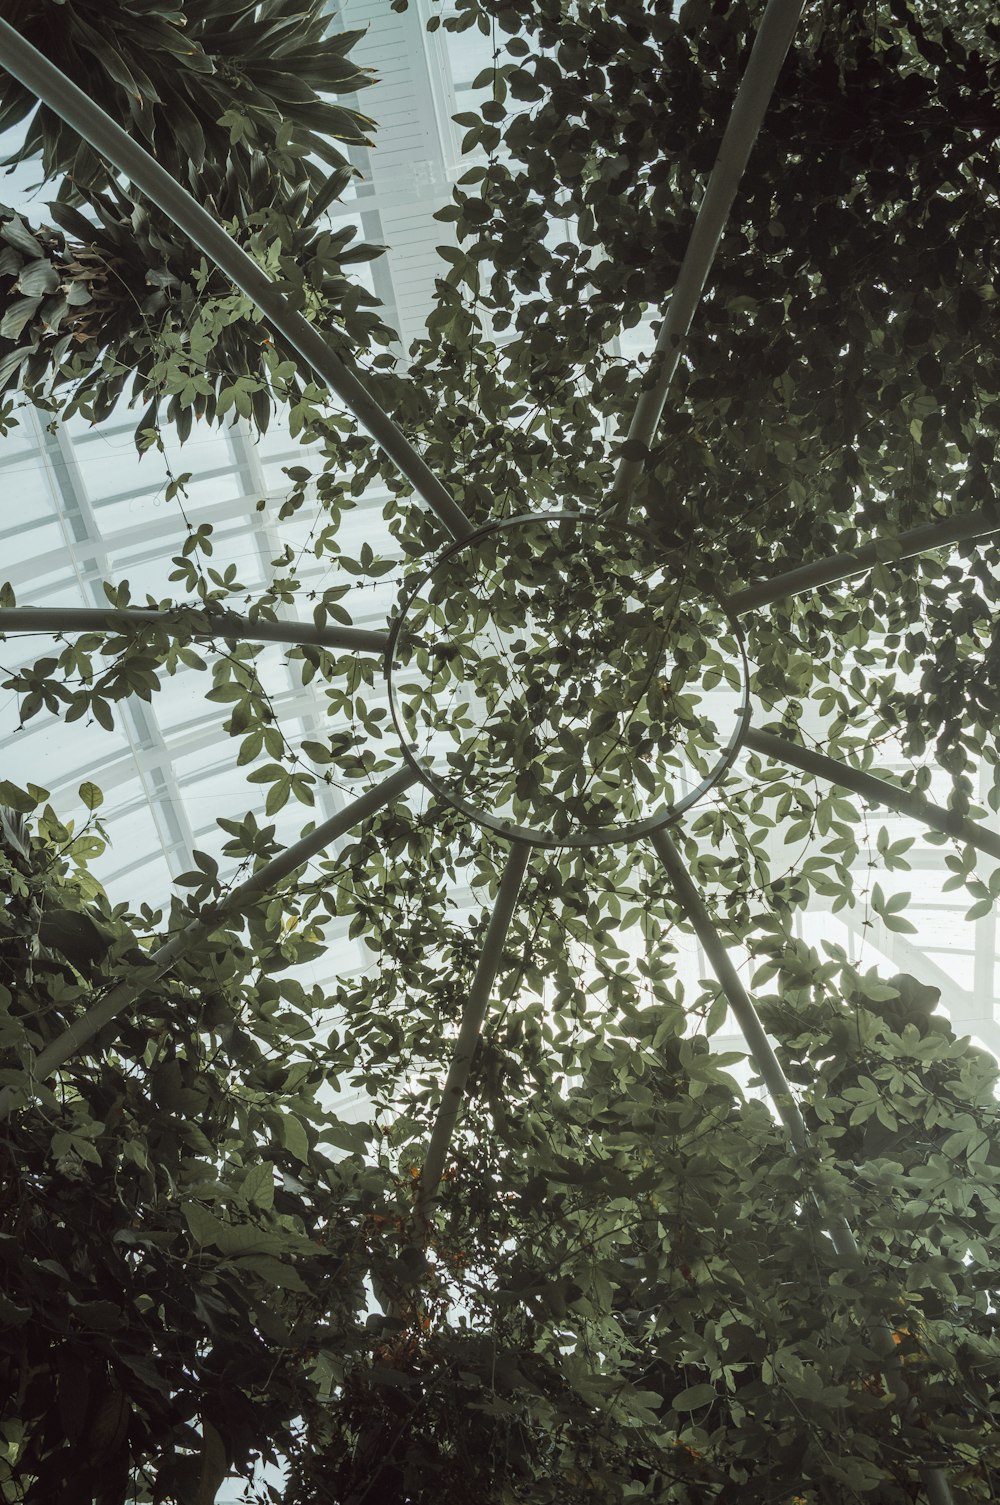 looking up at the canopy of a tree in a greenhouse